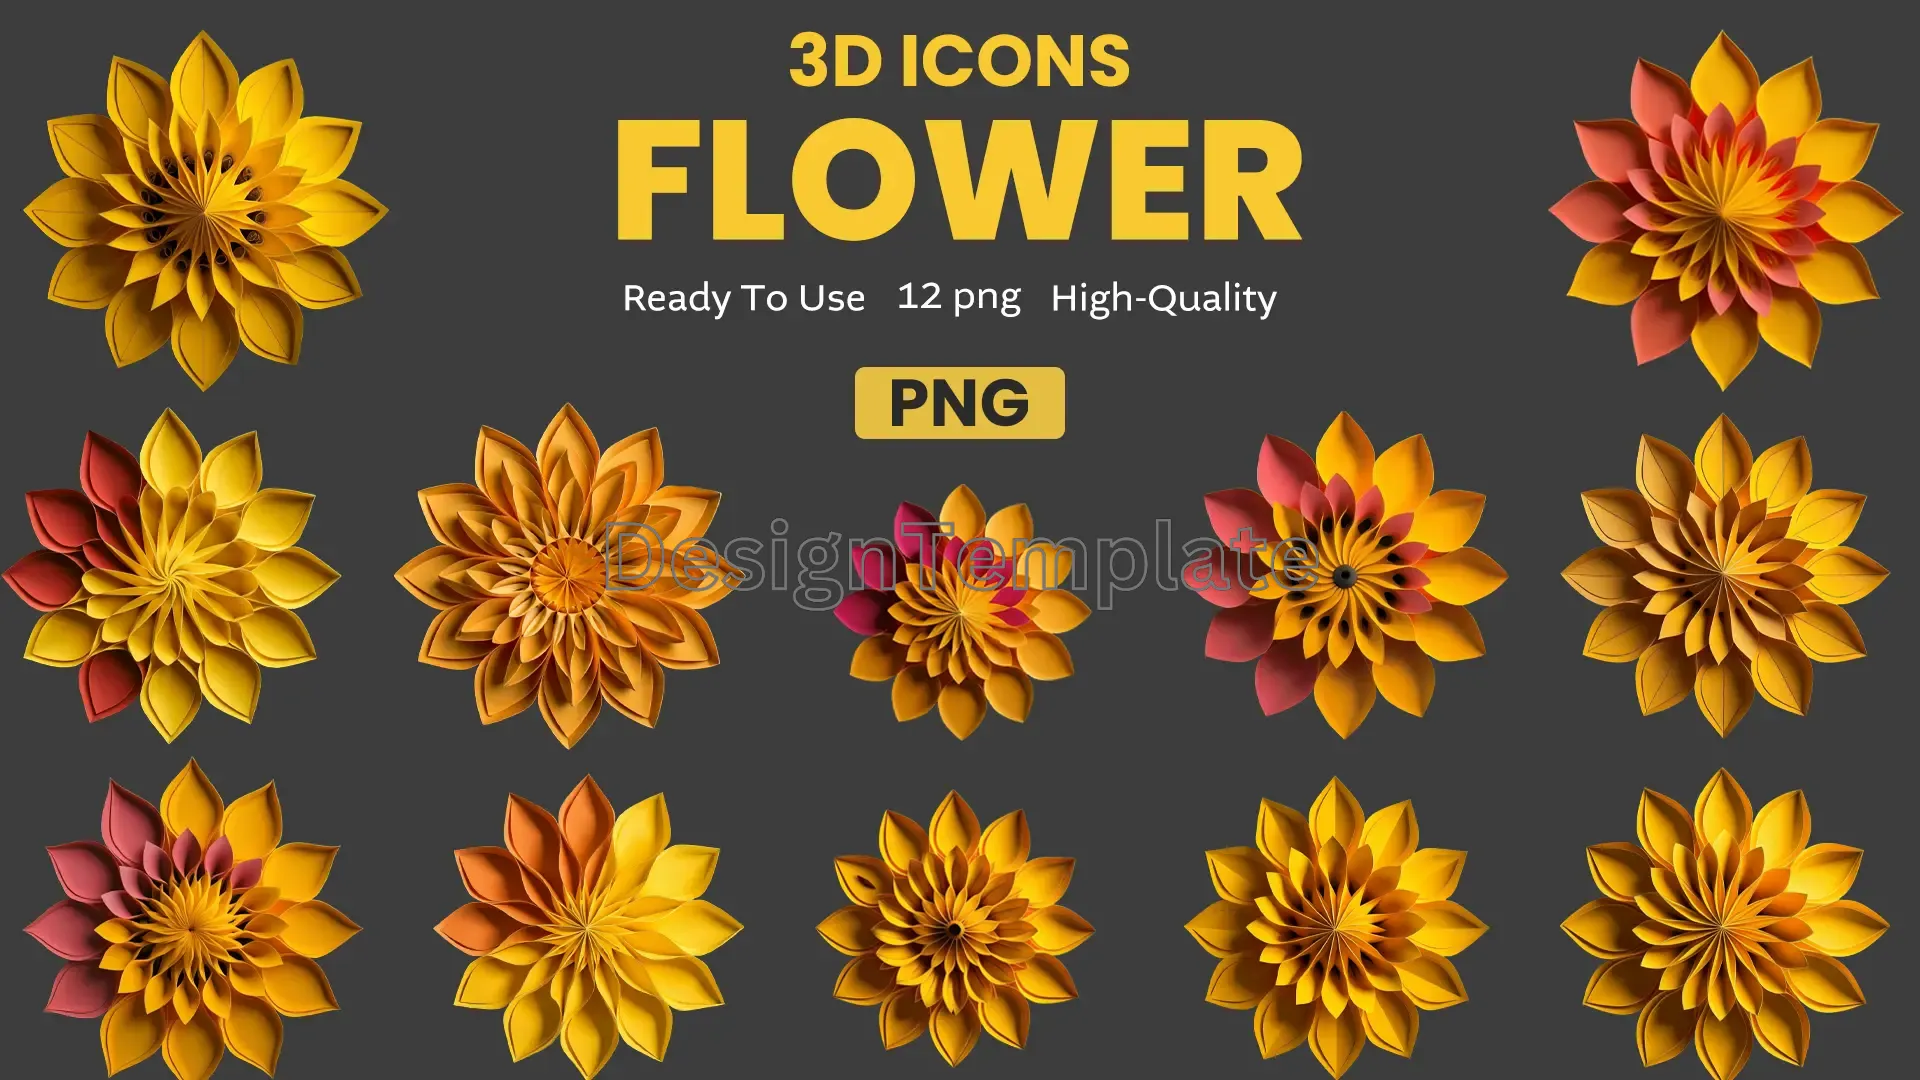 Colorful 3D Paper Flowers Elements Pack